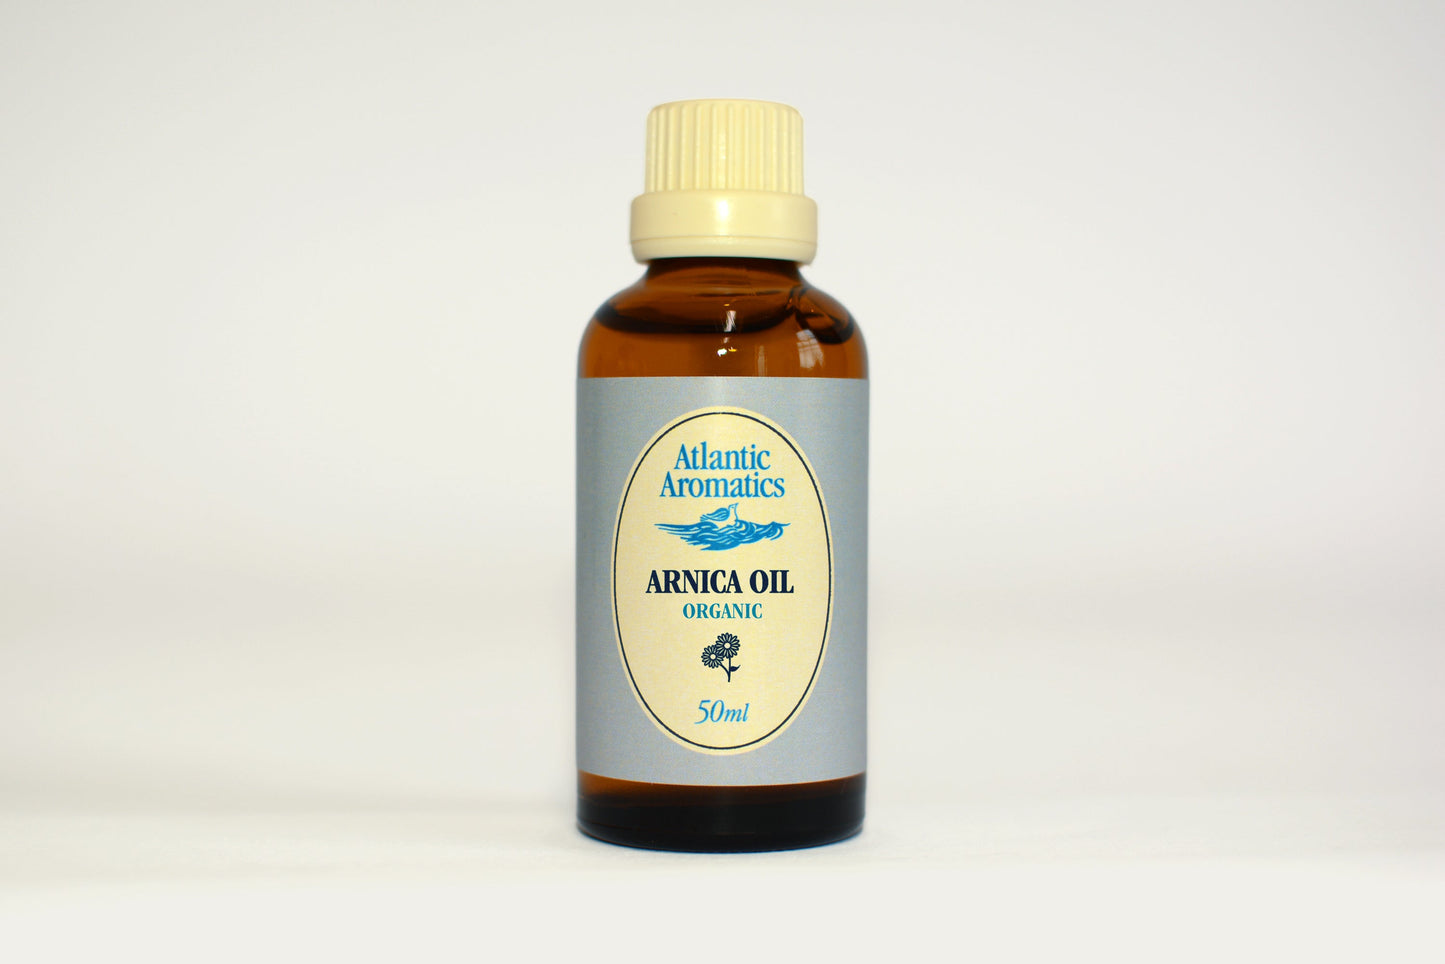 Arnica Oil extract (Org) 14573A